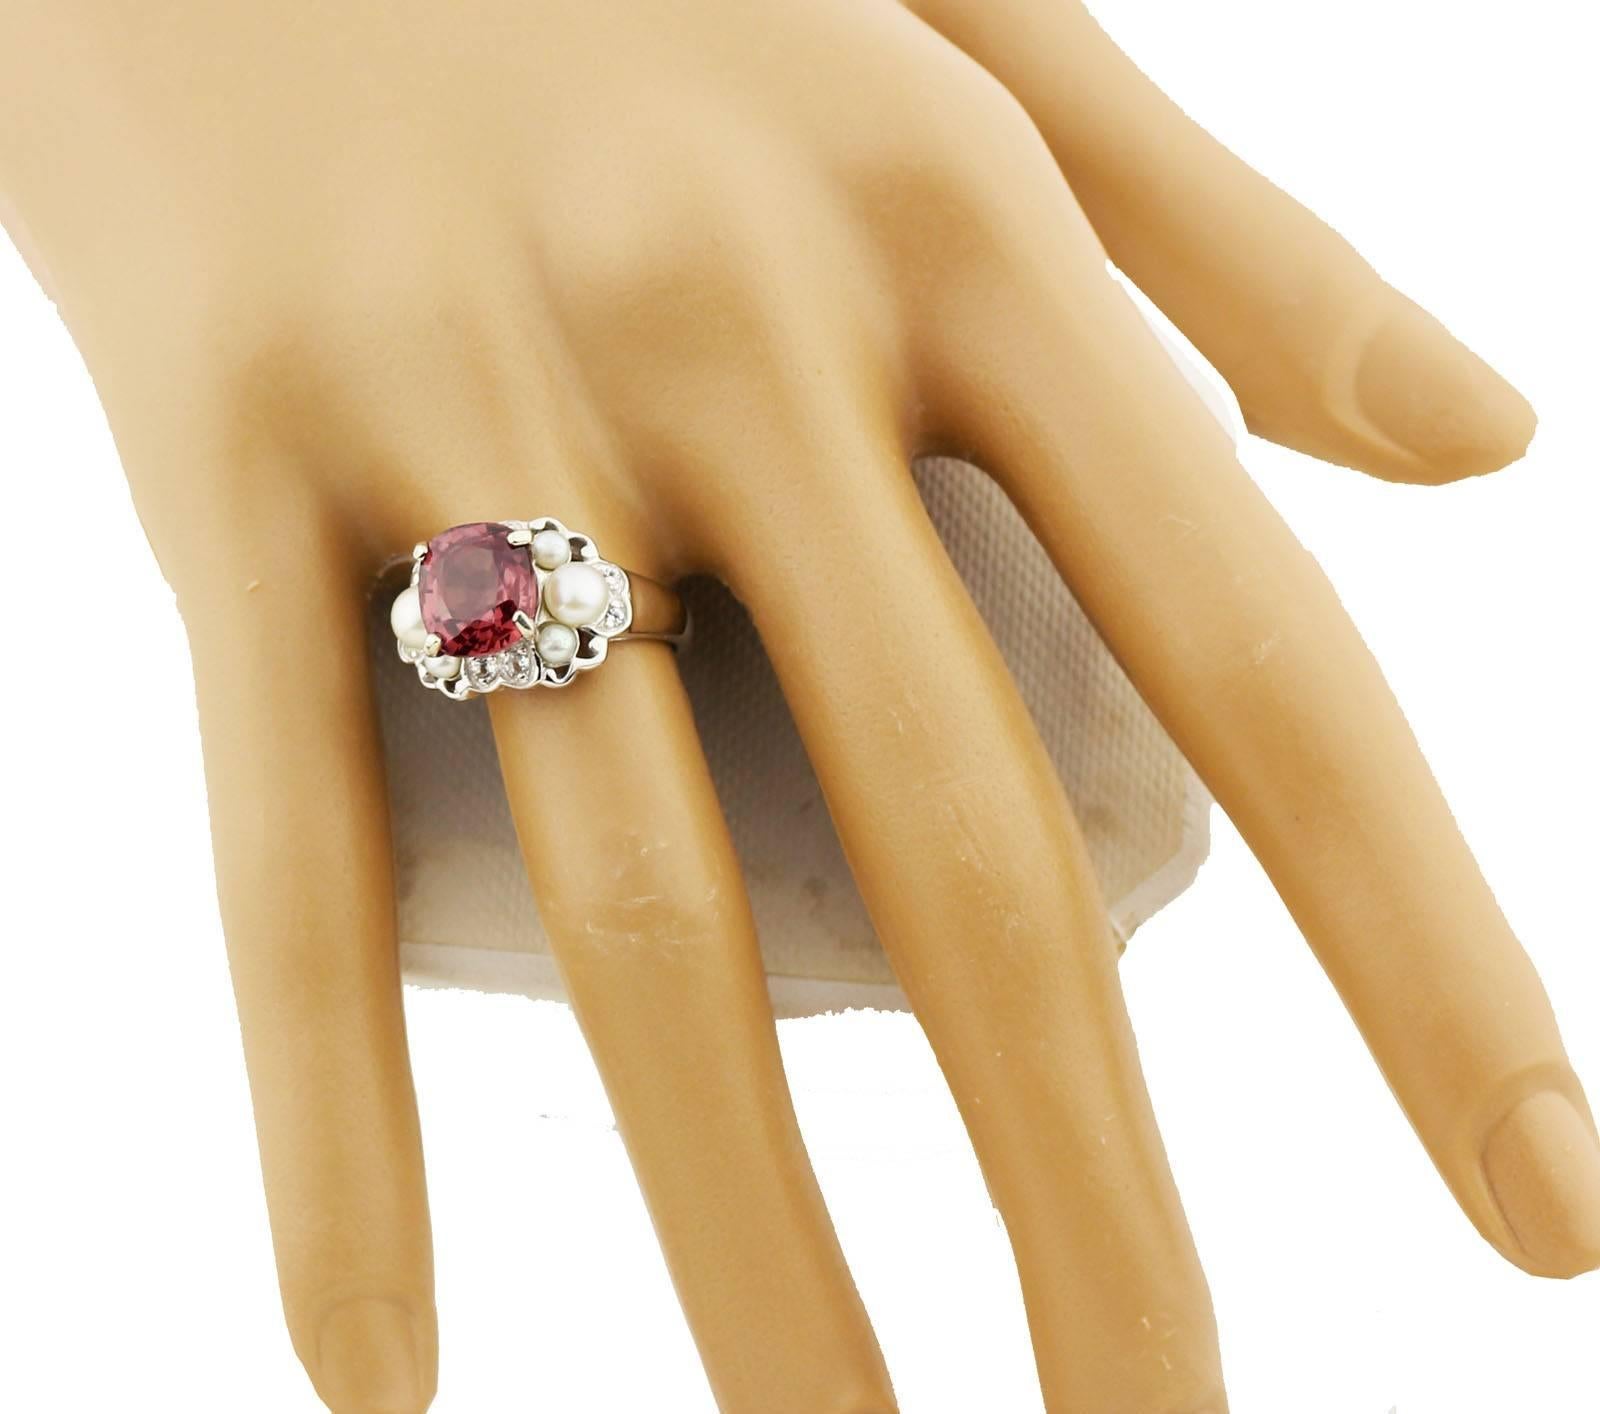 Set in Sterling Silver this sparkling red 3 Carat Zircon is enhanced with Pearls and teeny tiny little white Zircons.   The ring is a size 7 (sizable FOR FREE)    